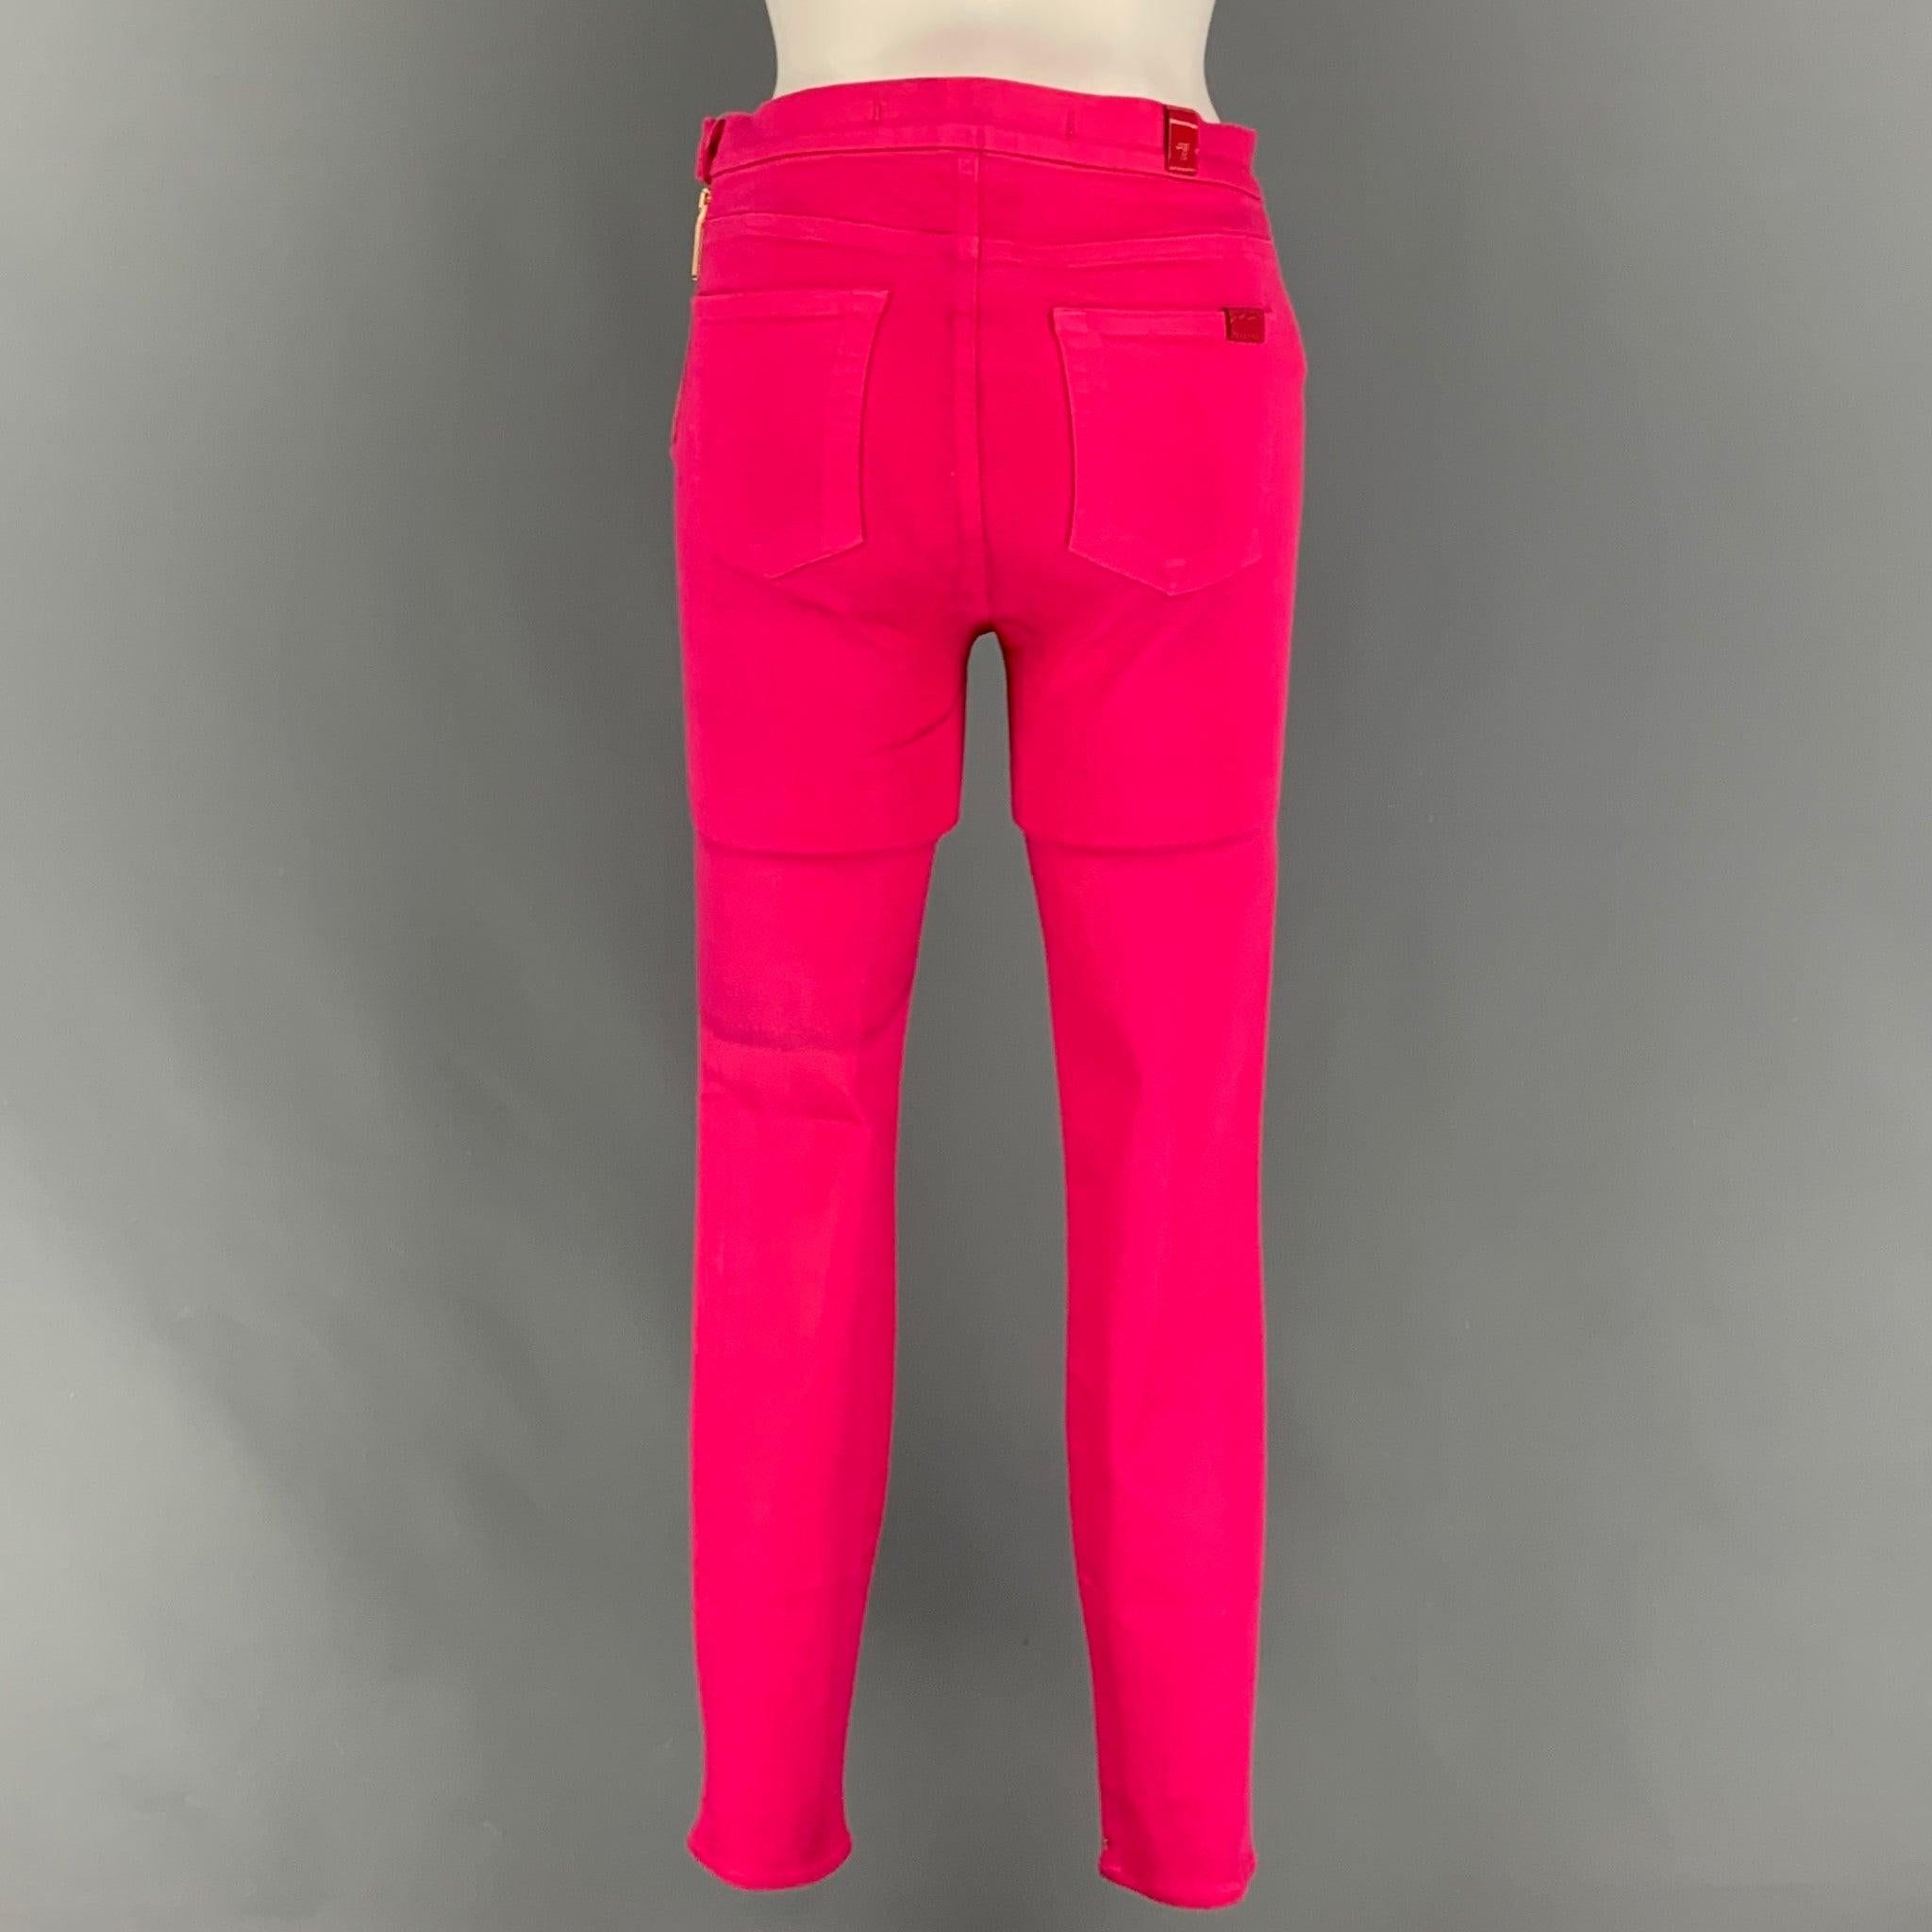 GIAMBATTISTA VALLI x 7 FOR ALL MANKIND pants comes in a pink cotton / elastane featuring a skinny fit, gold tone hardware, bak pockets, and a side button & zip up closure. Made in Italy.
Very Good
Pre-Owned Condition. 

Marked:   27 

Measurements: